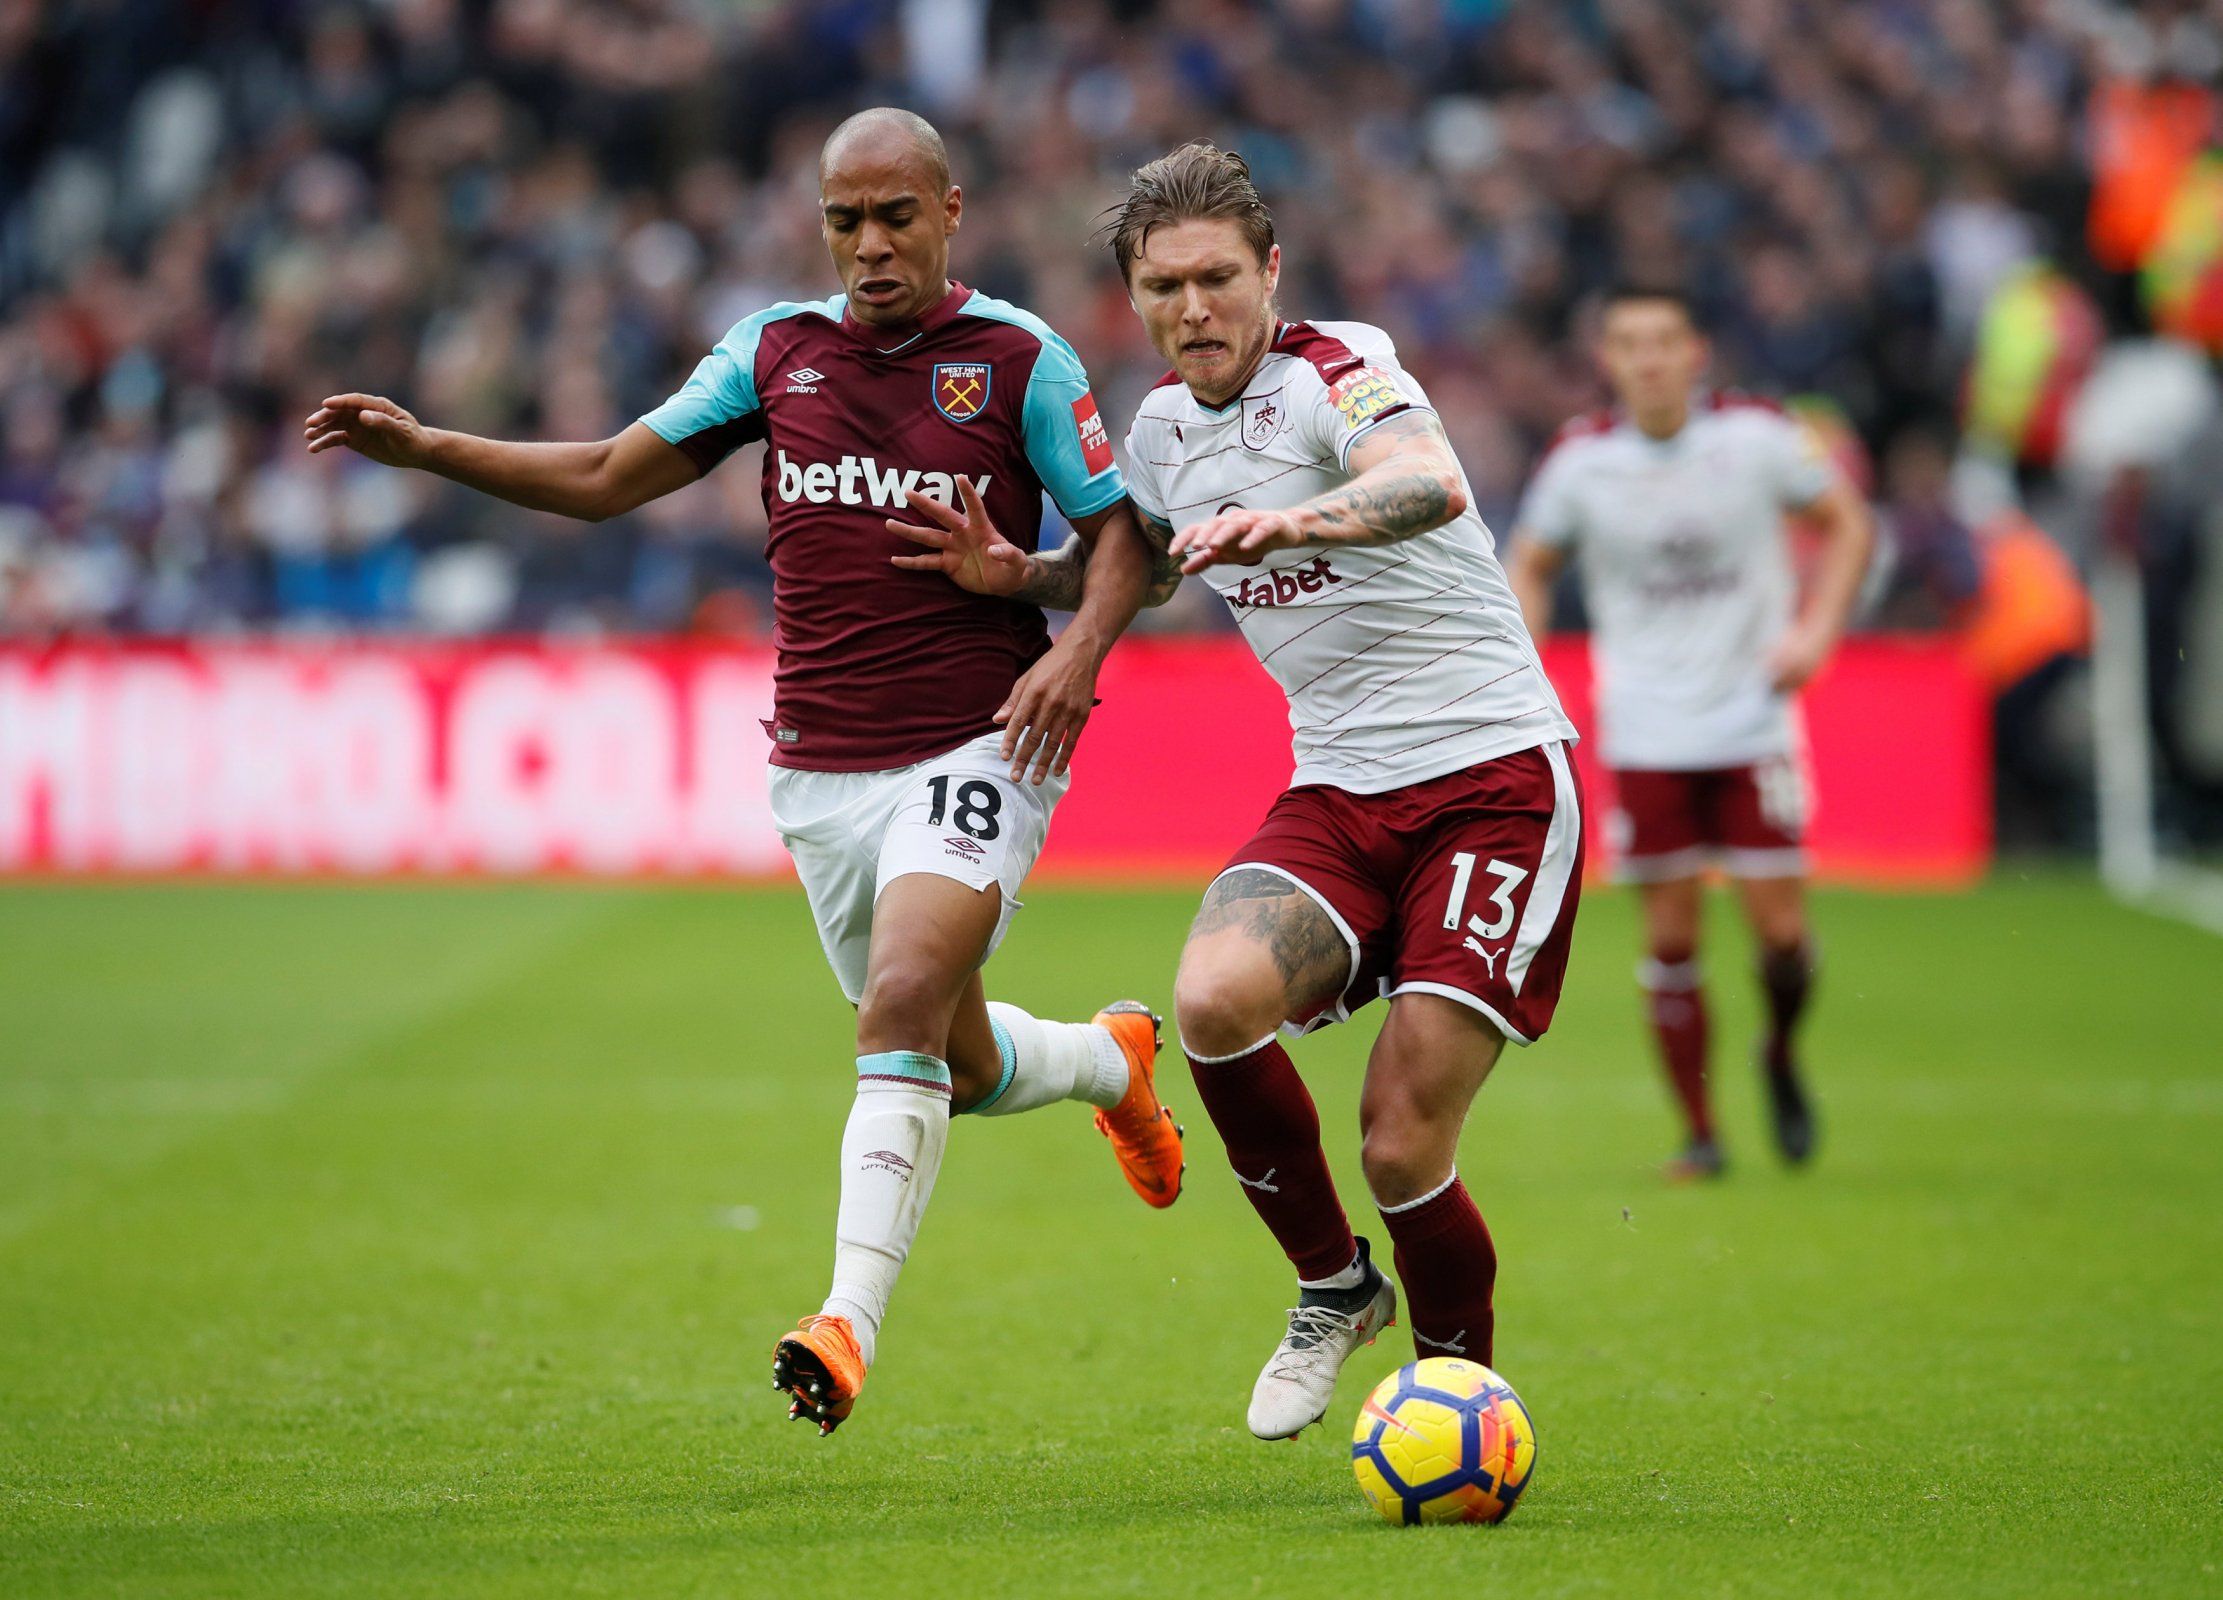 West Ham United's Joao Mario playing against Burnley